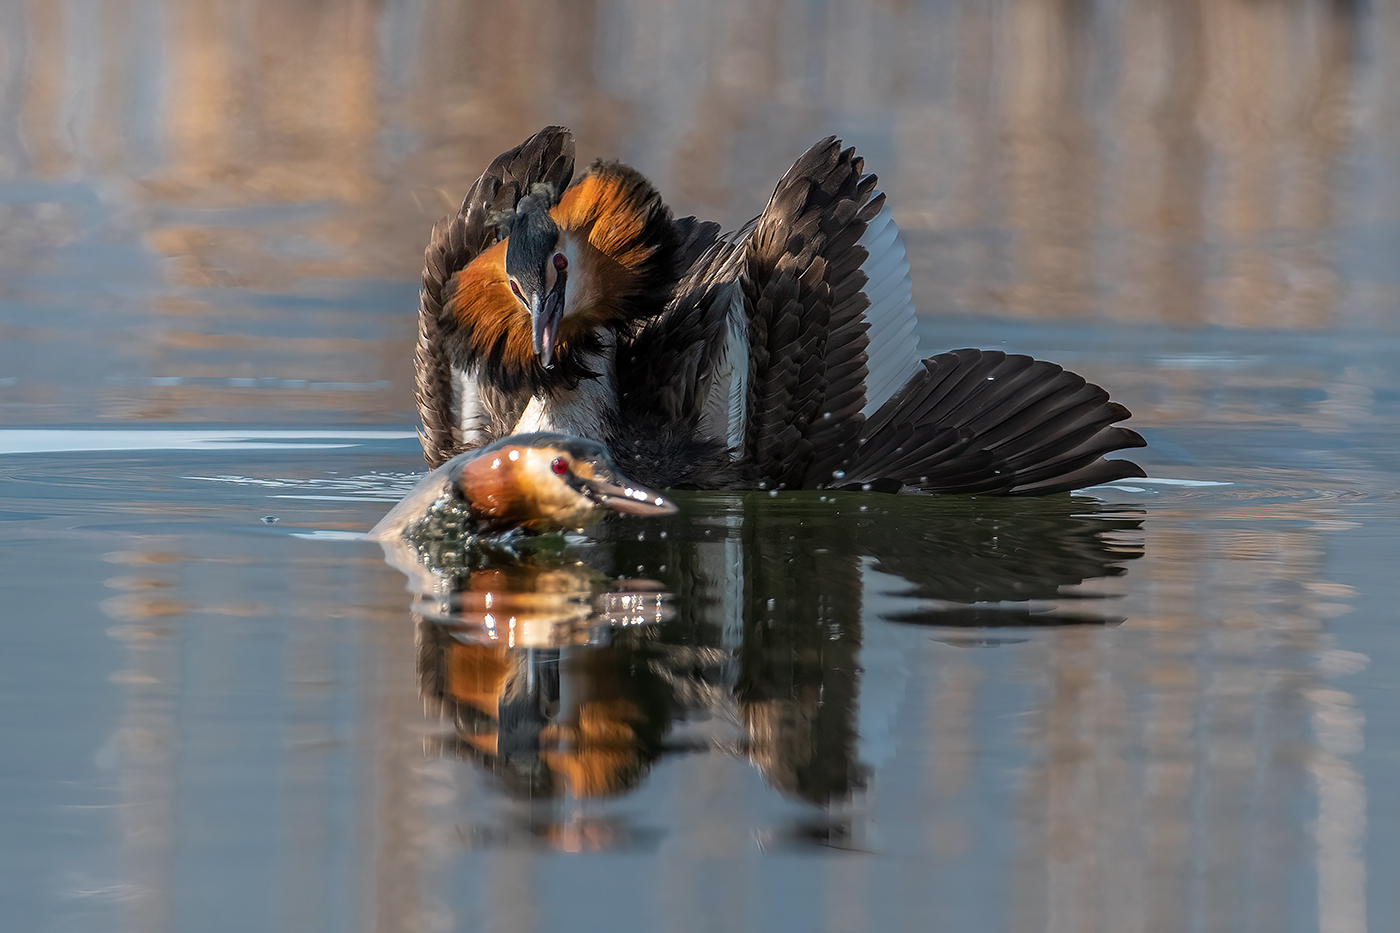 The dance of the grebes...